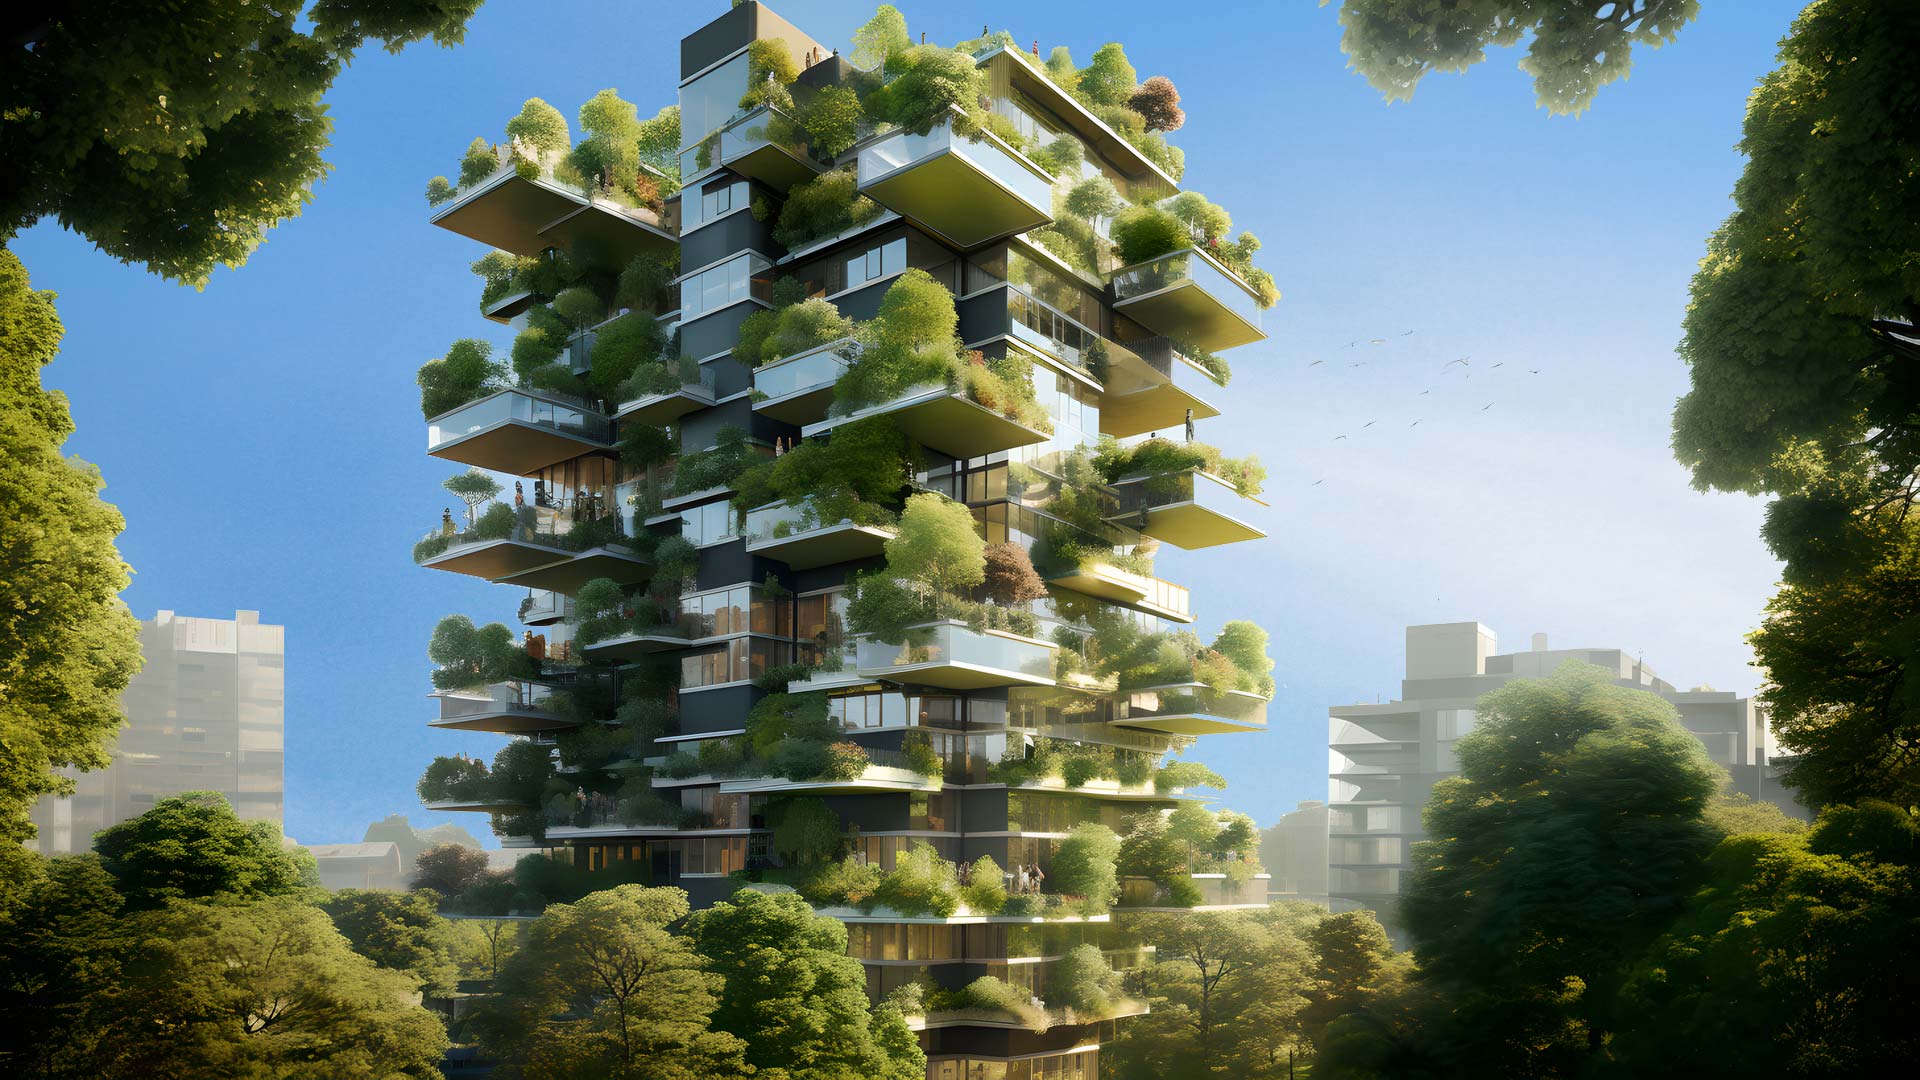 Tower Garden, innovation and ecology in architecture